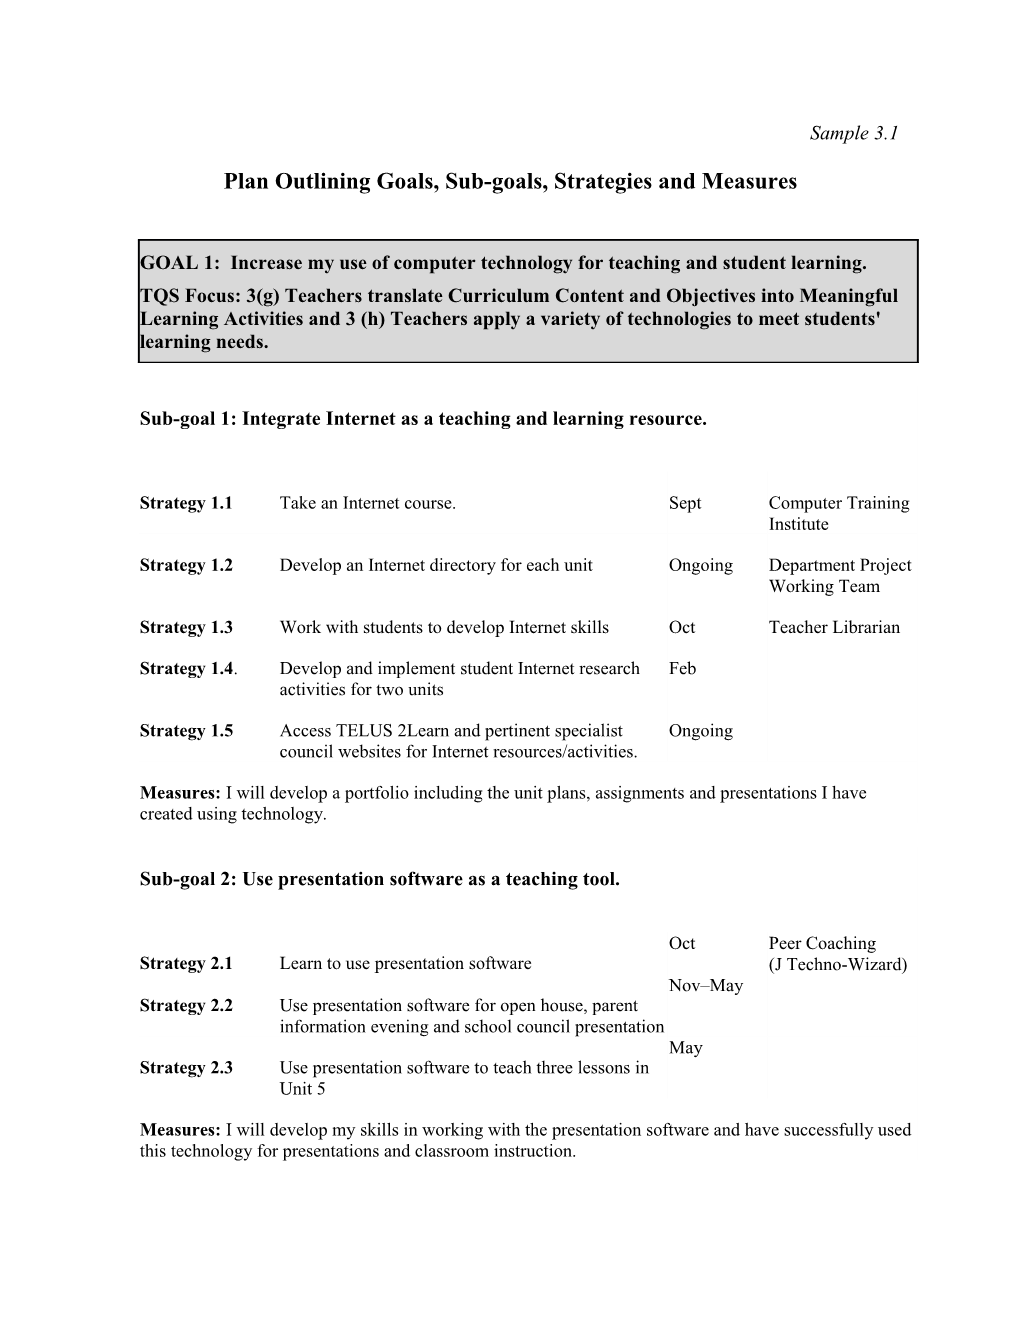 Plan Outlining Goals, Sub-Goals, Strategies and Measures